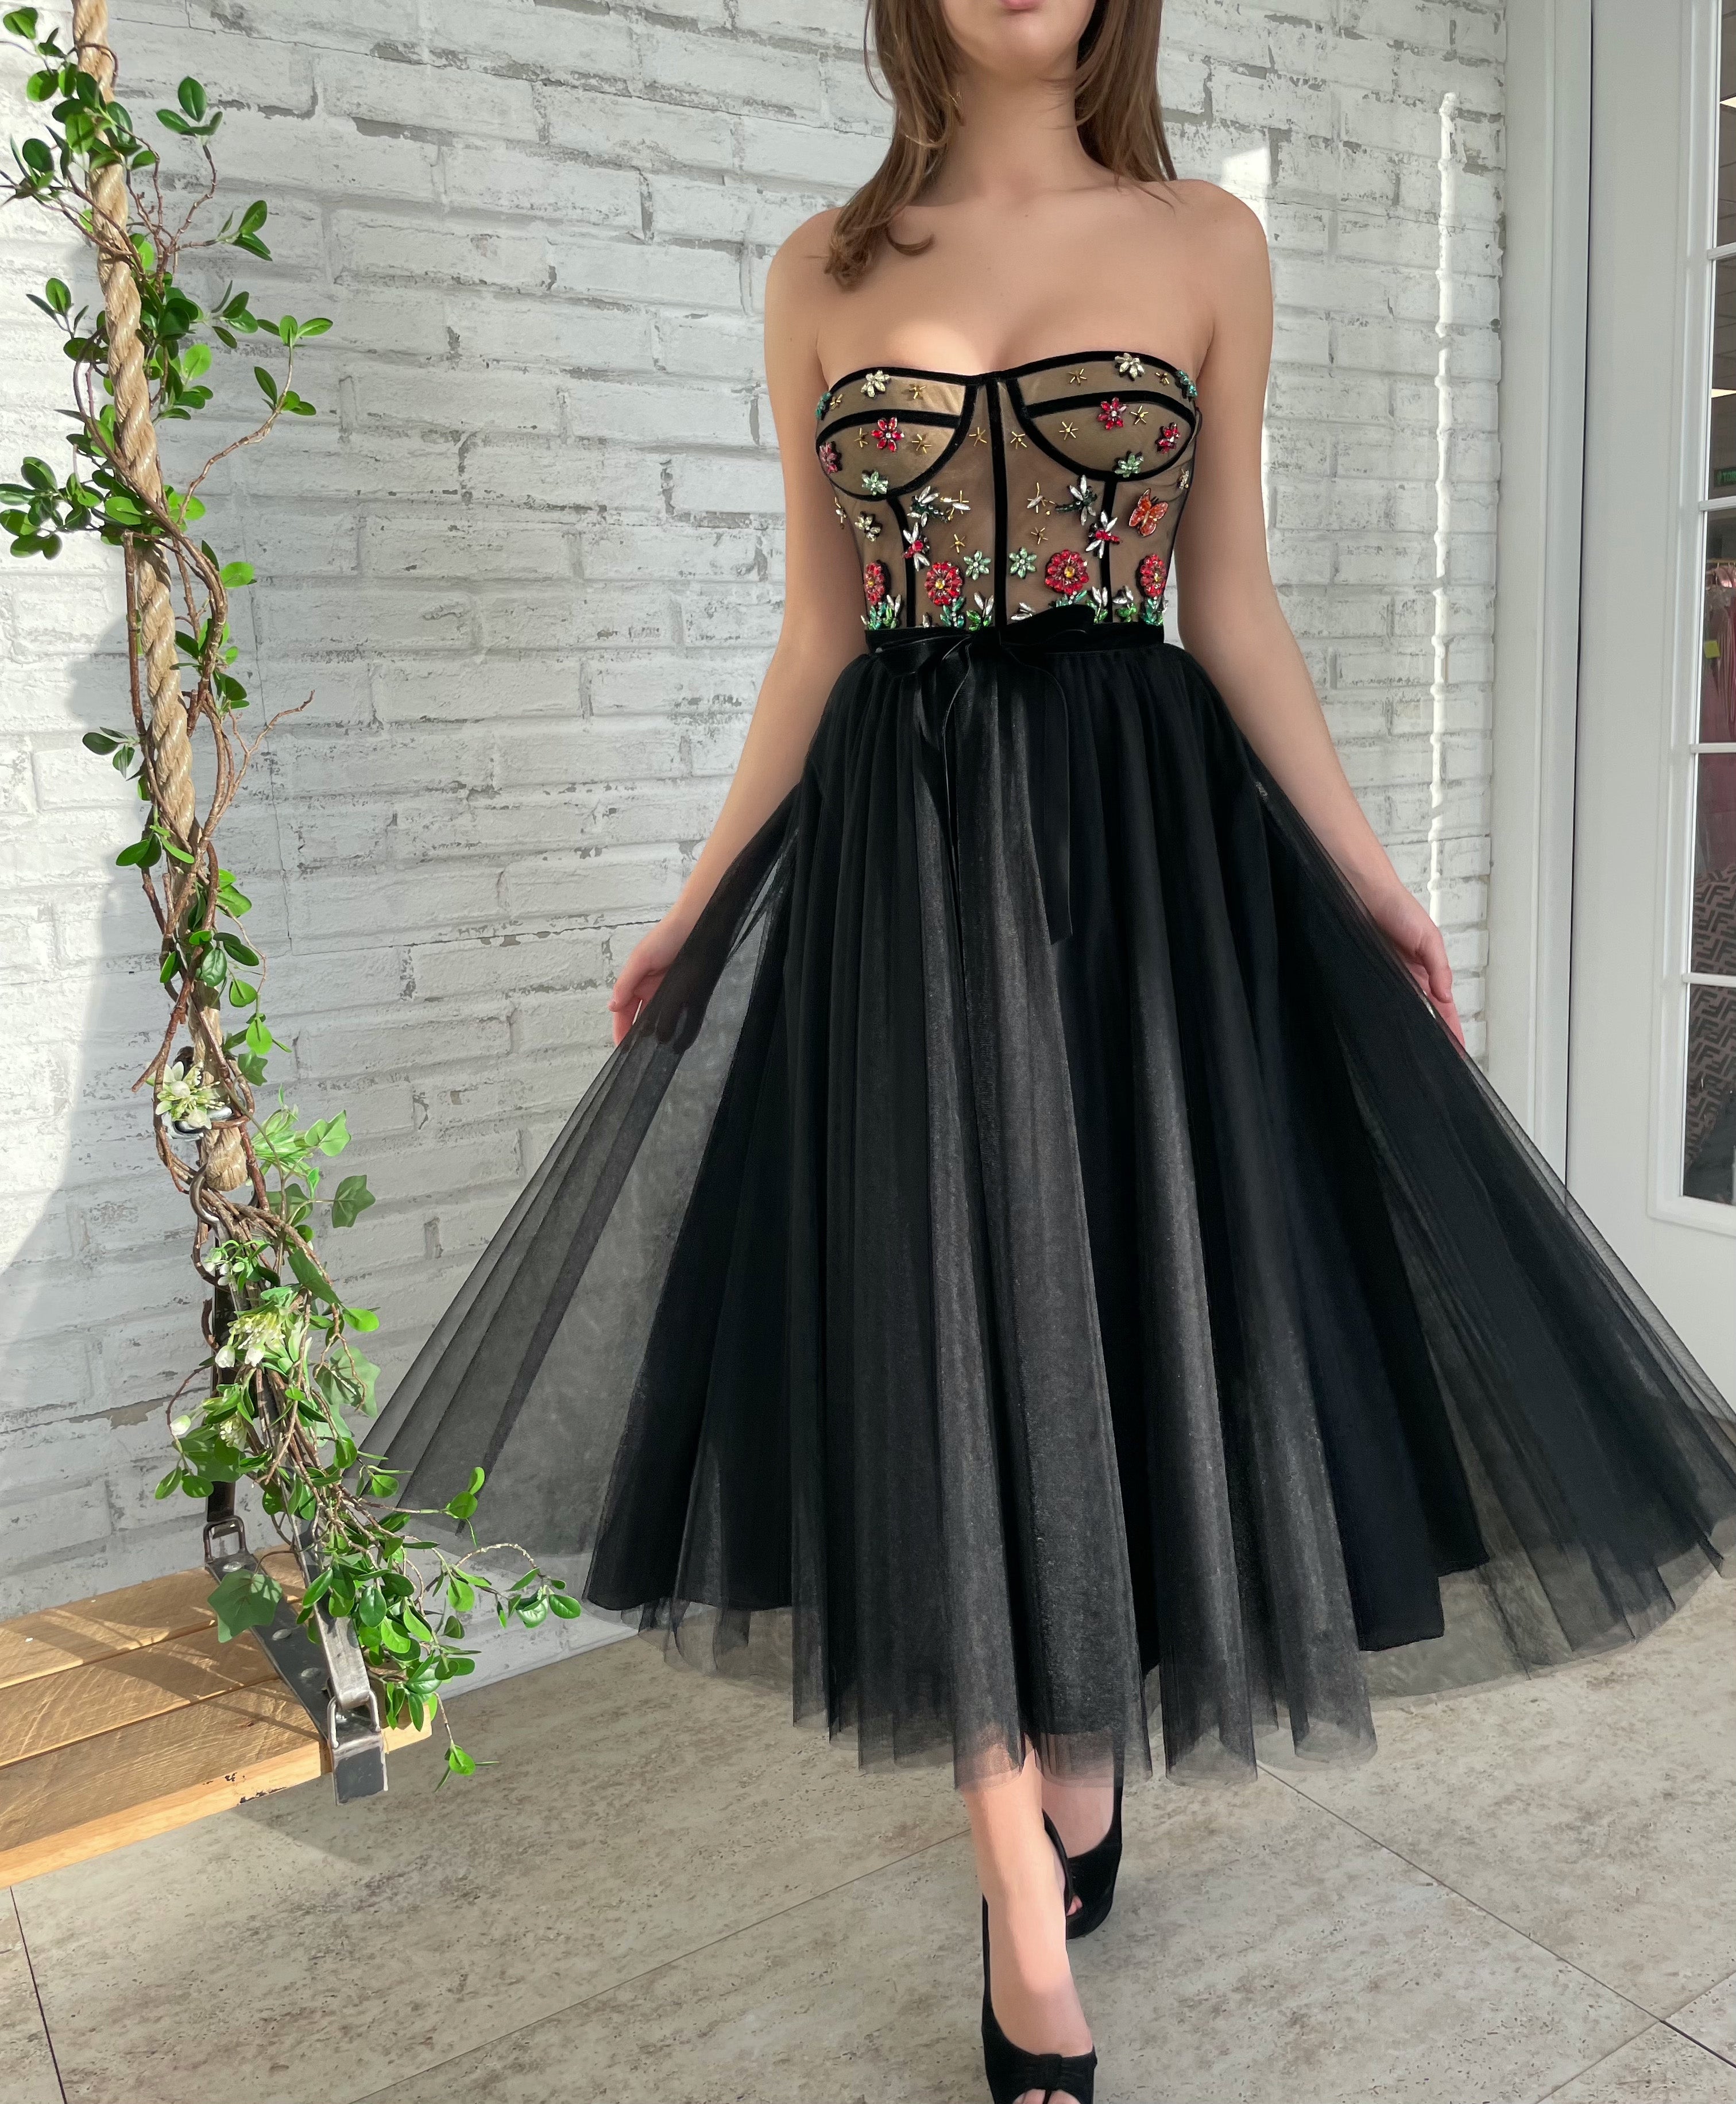 Black midi dress with no sleeves and embroidery